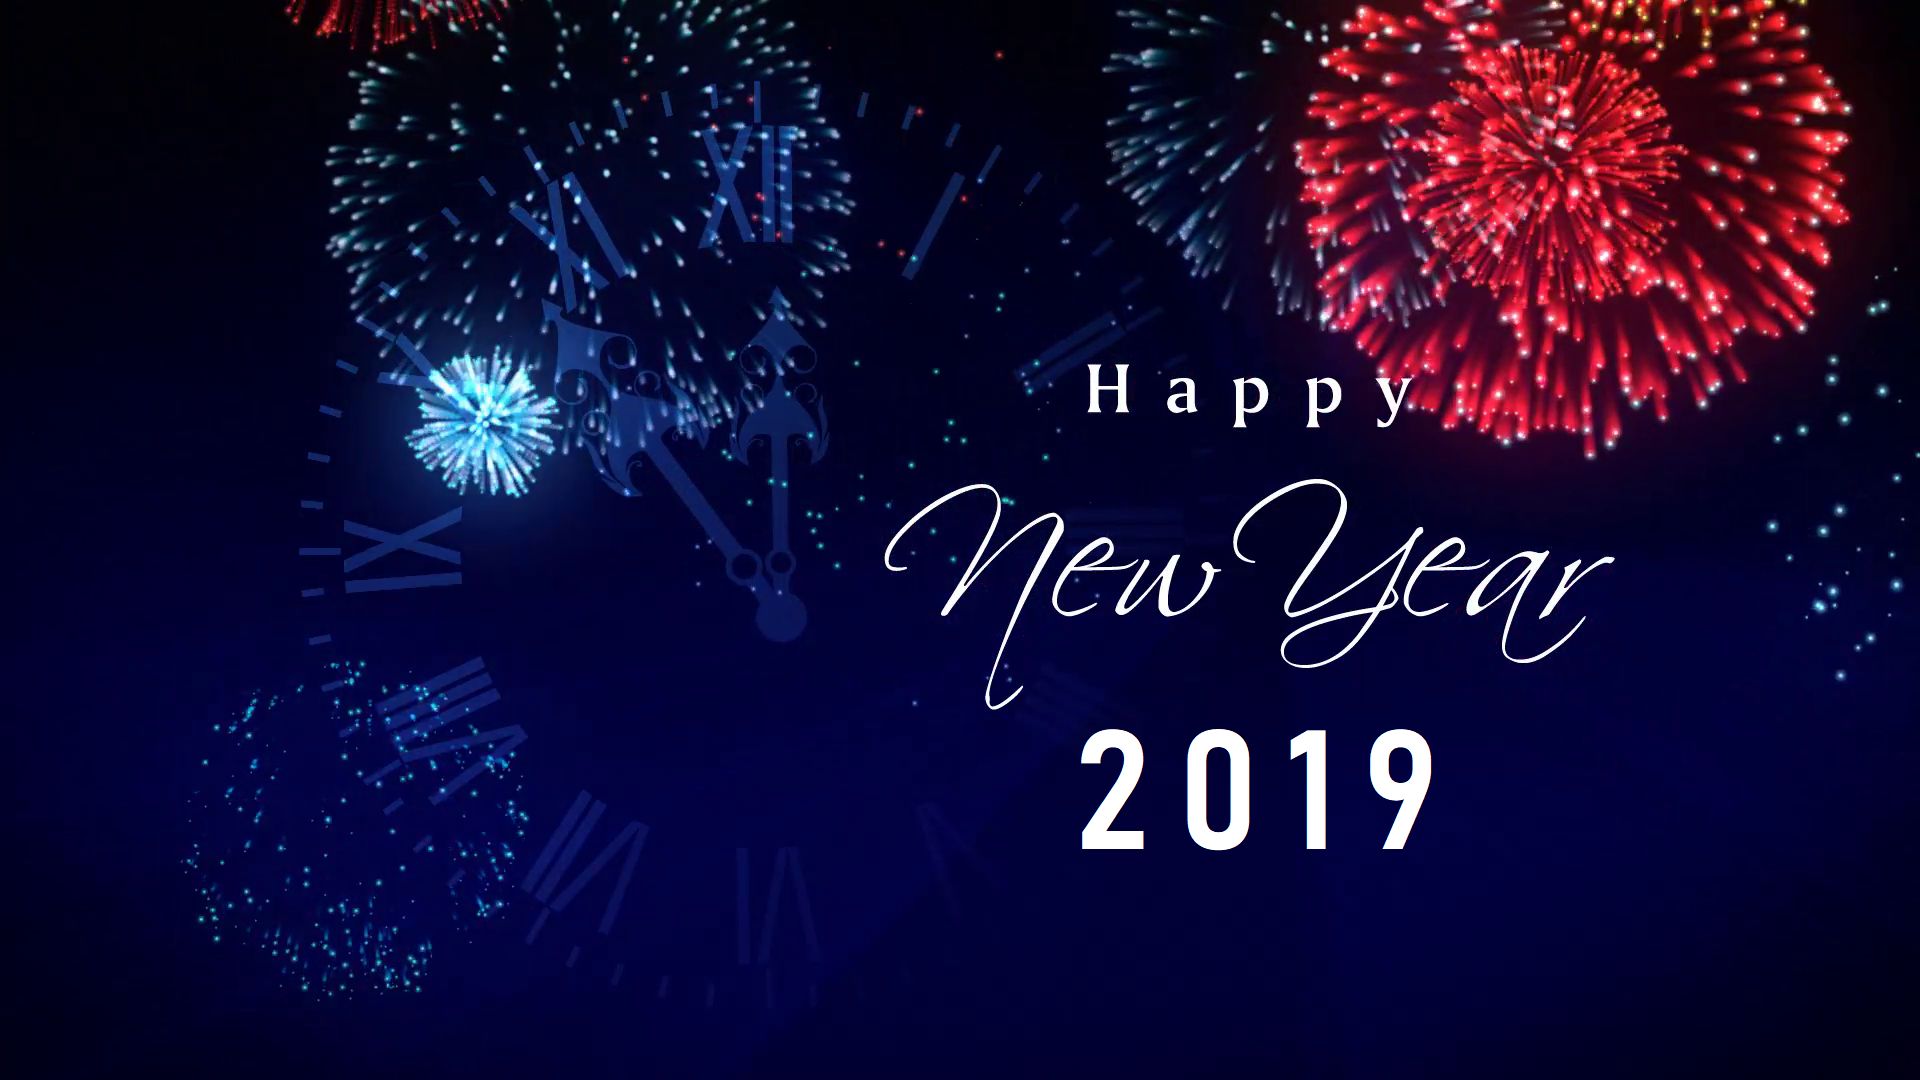 happy new year, holiday, new year 2019, fireworks, night